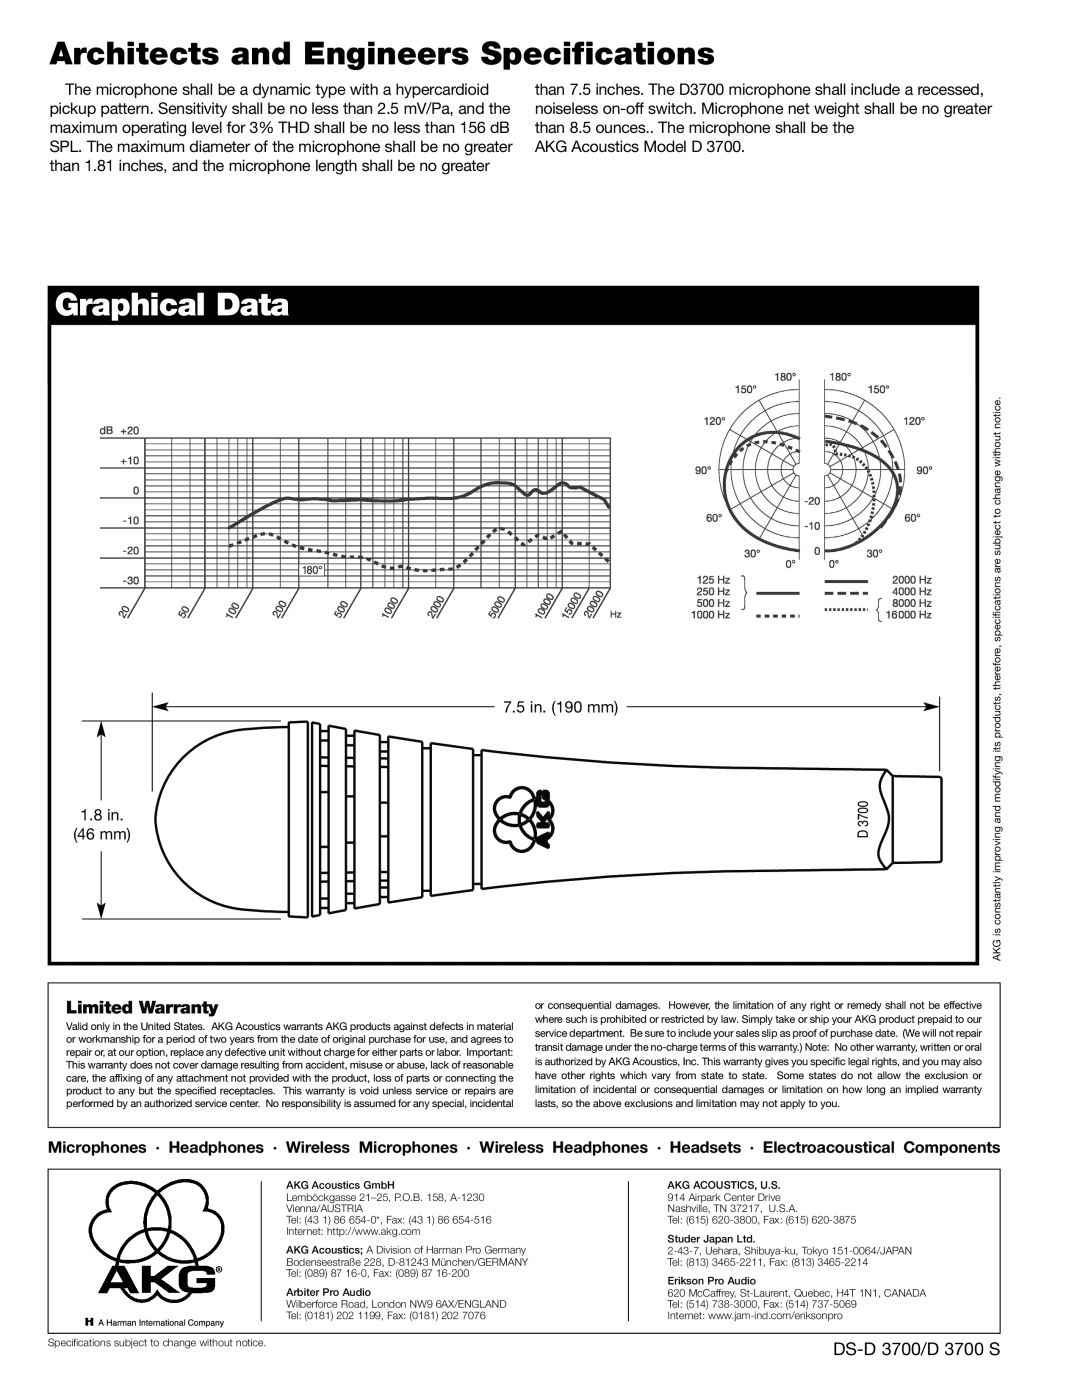 AKG Acoustics D 3700S Architects and Engineers Specifications, Graphical Data, Limited Warranty, DS-D 3700/D 3700 S, 46 mm 